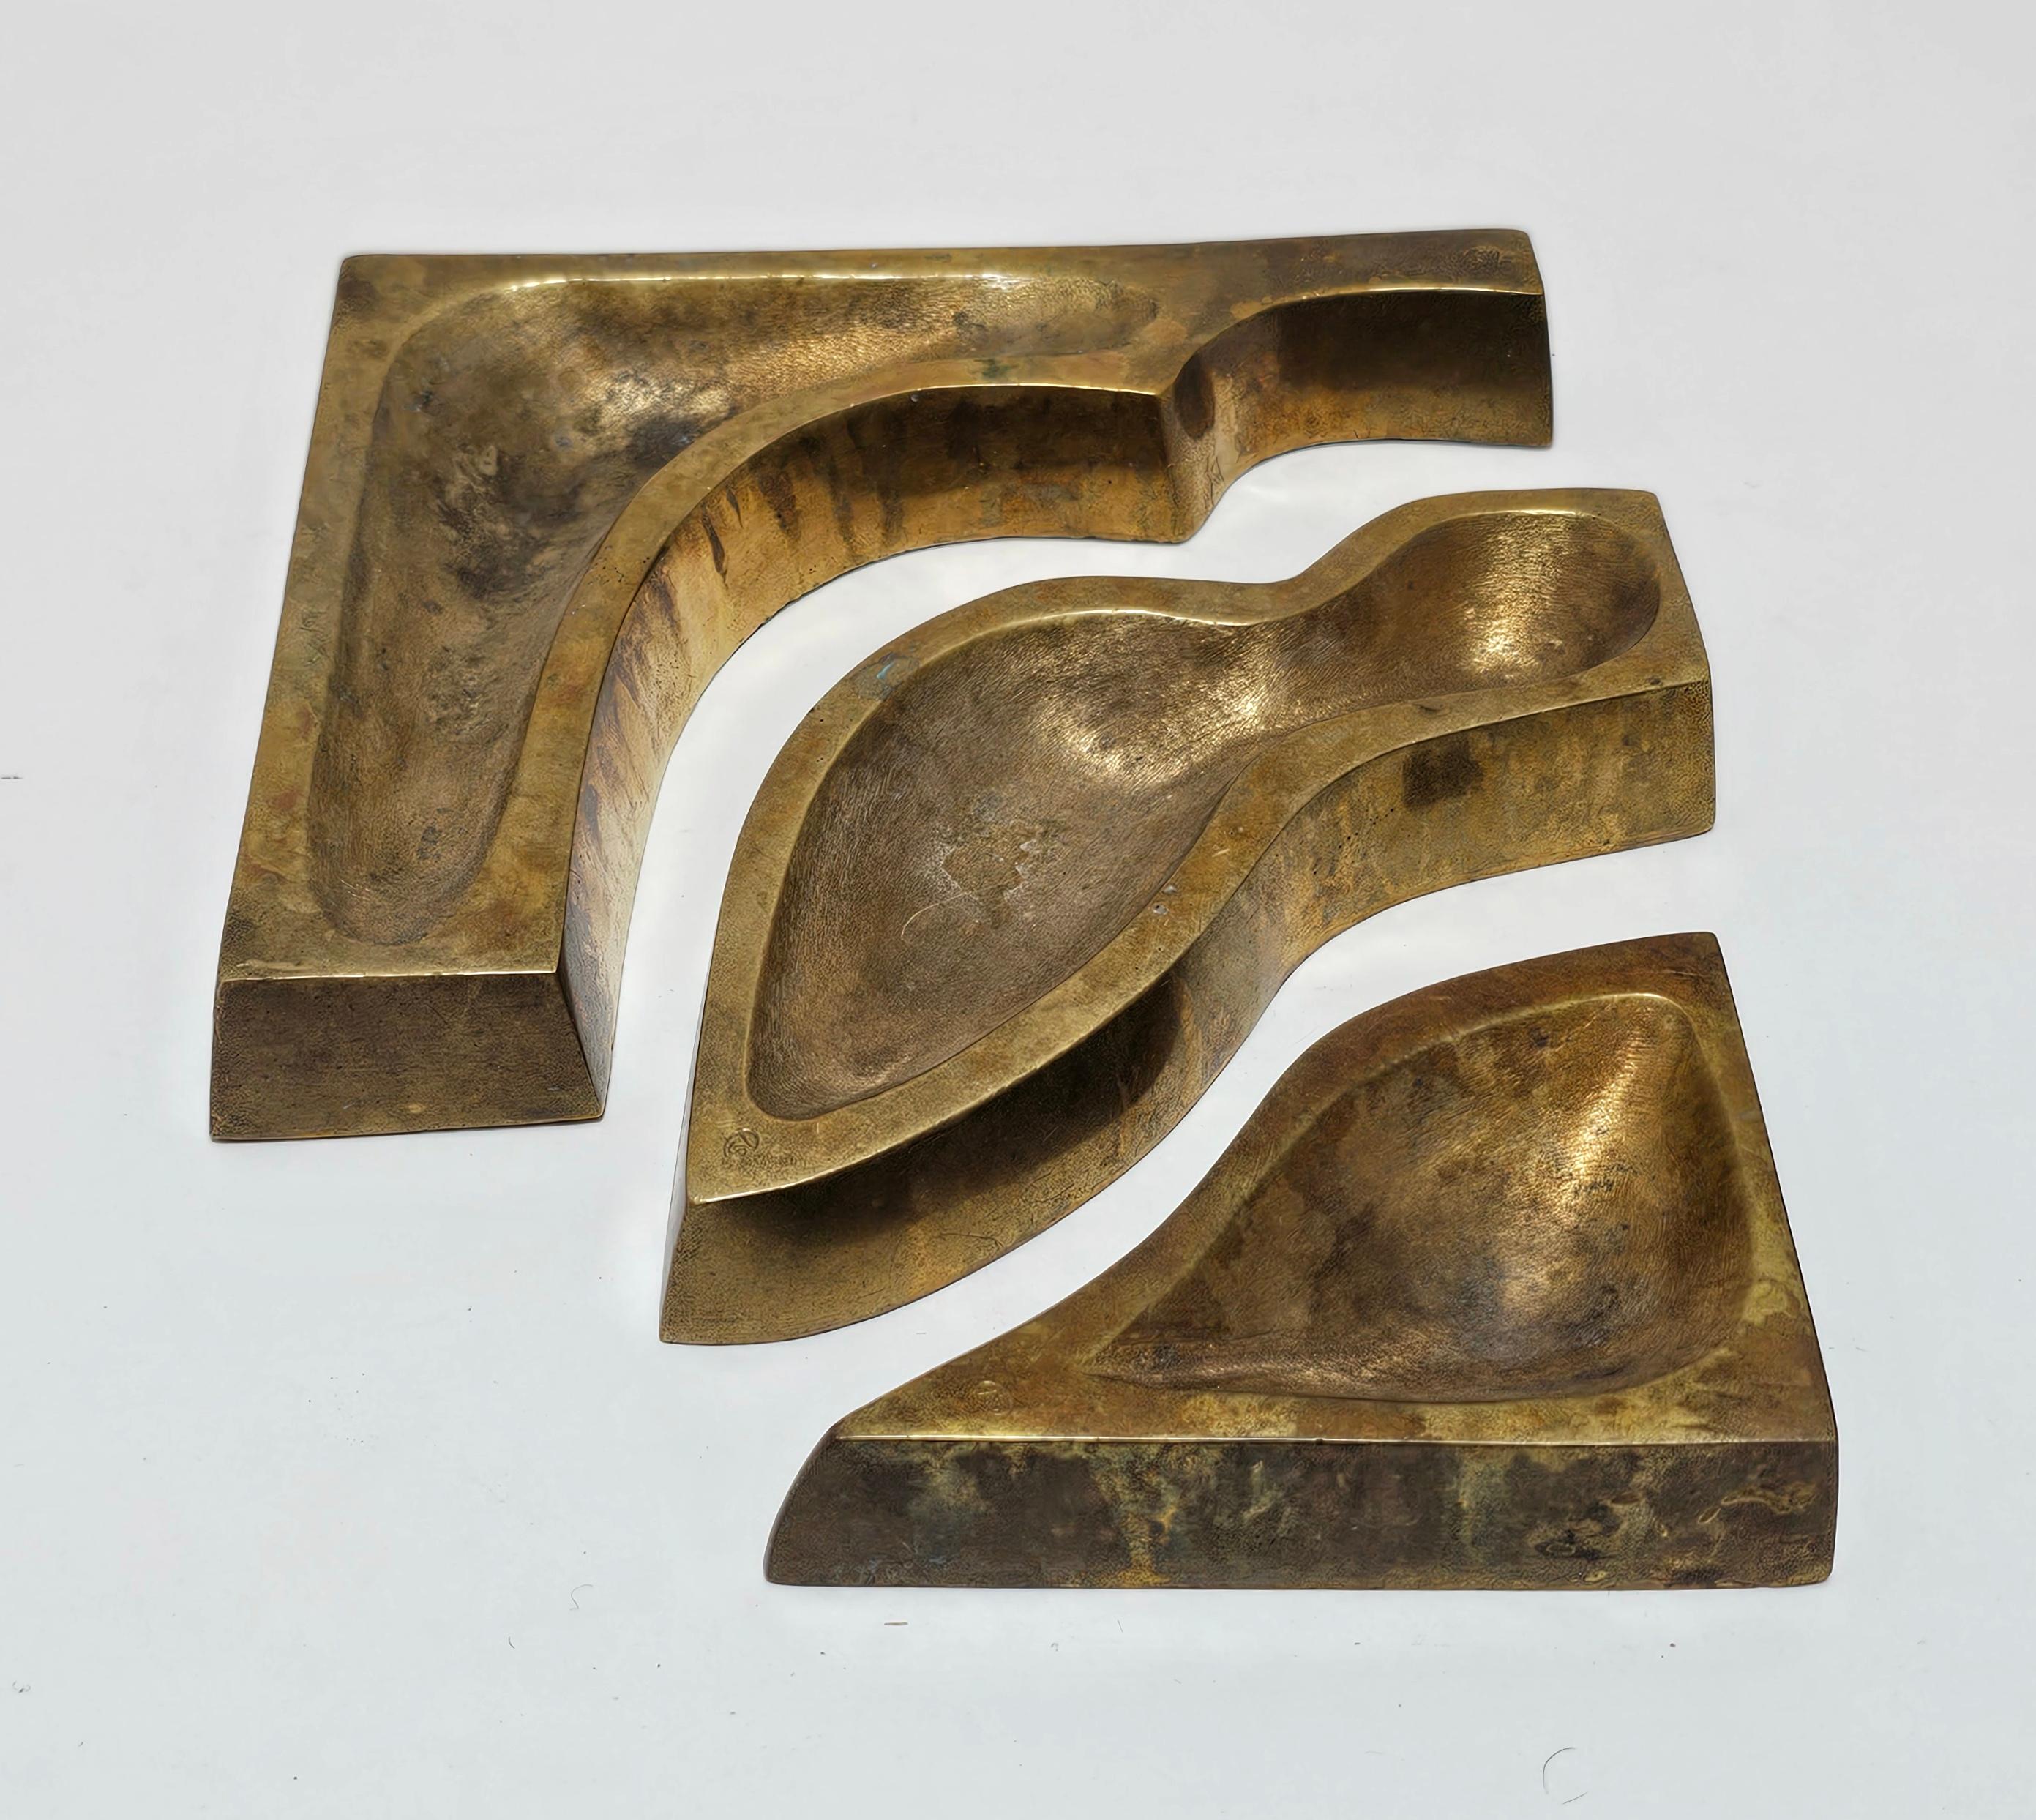 In this listing you will find a spectacular Brutalist 3-piece Cigar ashtray done in bronze and designed by Yugoslav architect Vera Stanarcevic. This sculptural piece allows you to have a playful piece of decor that has both artistic and practical